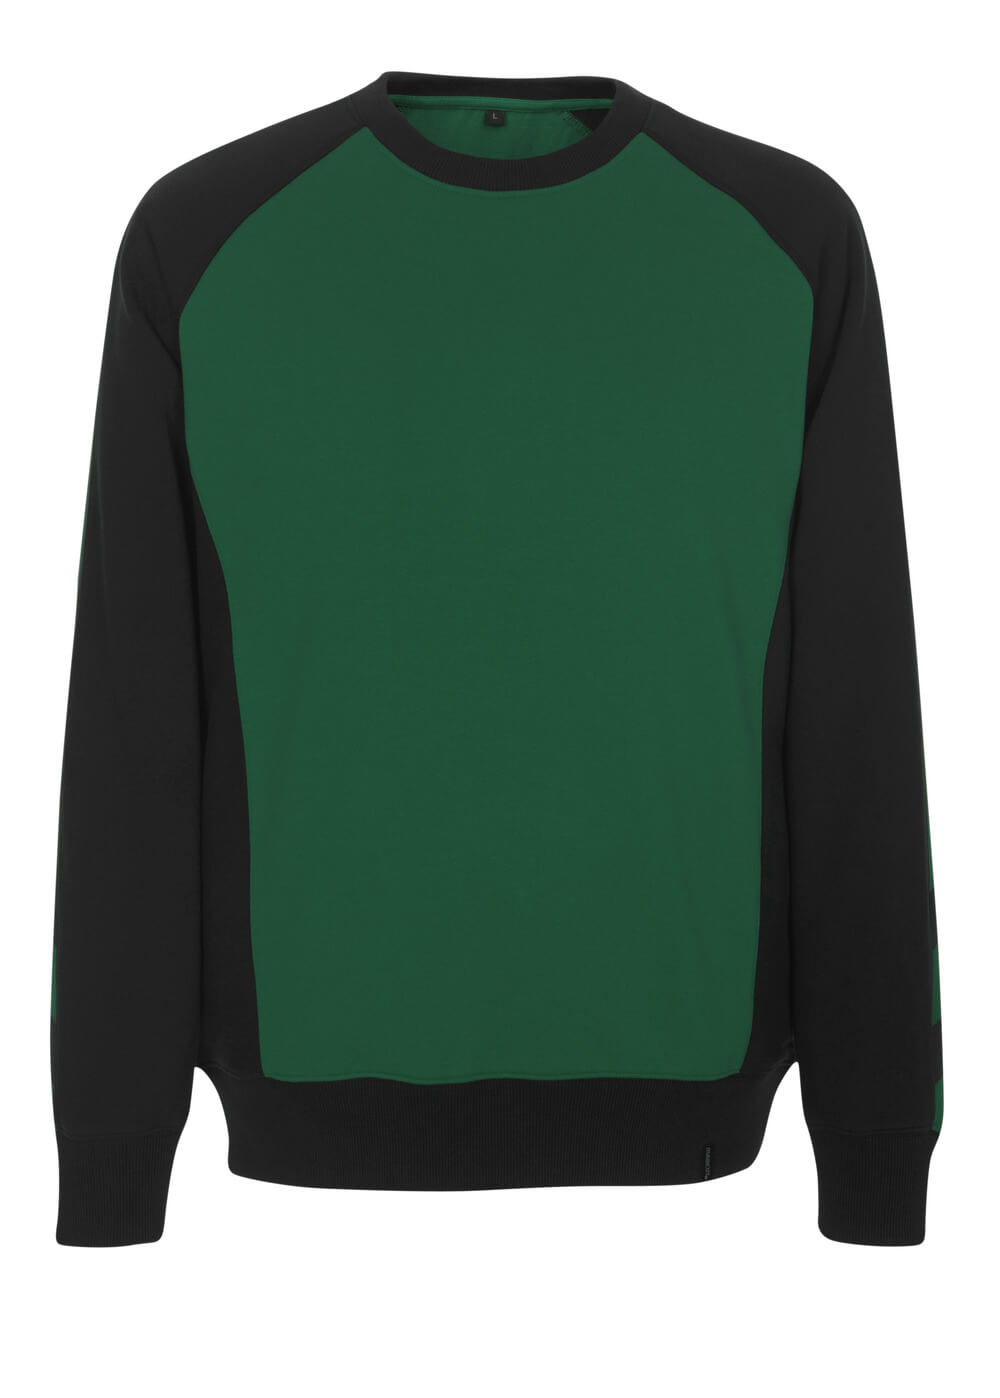 WITTAND SWEATER, GREEN/BLACK, 60%OTTON/40%OLYESTER, MASCOT UNIQUE